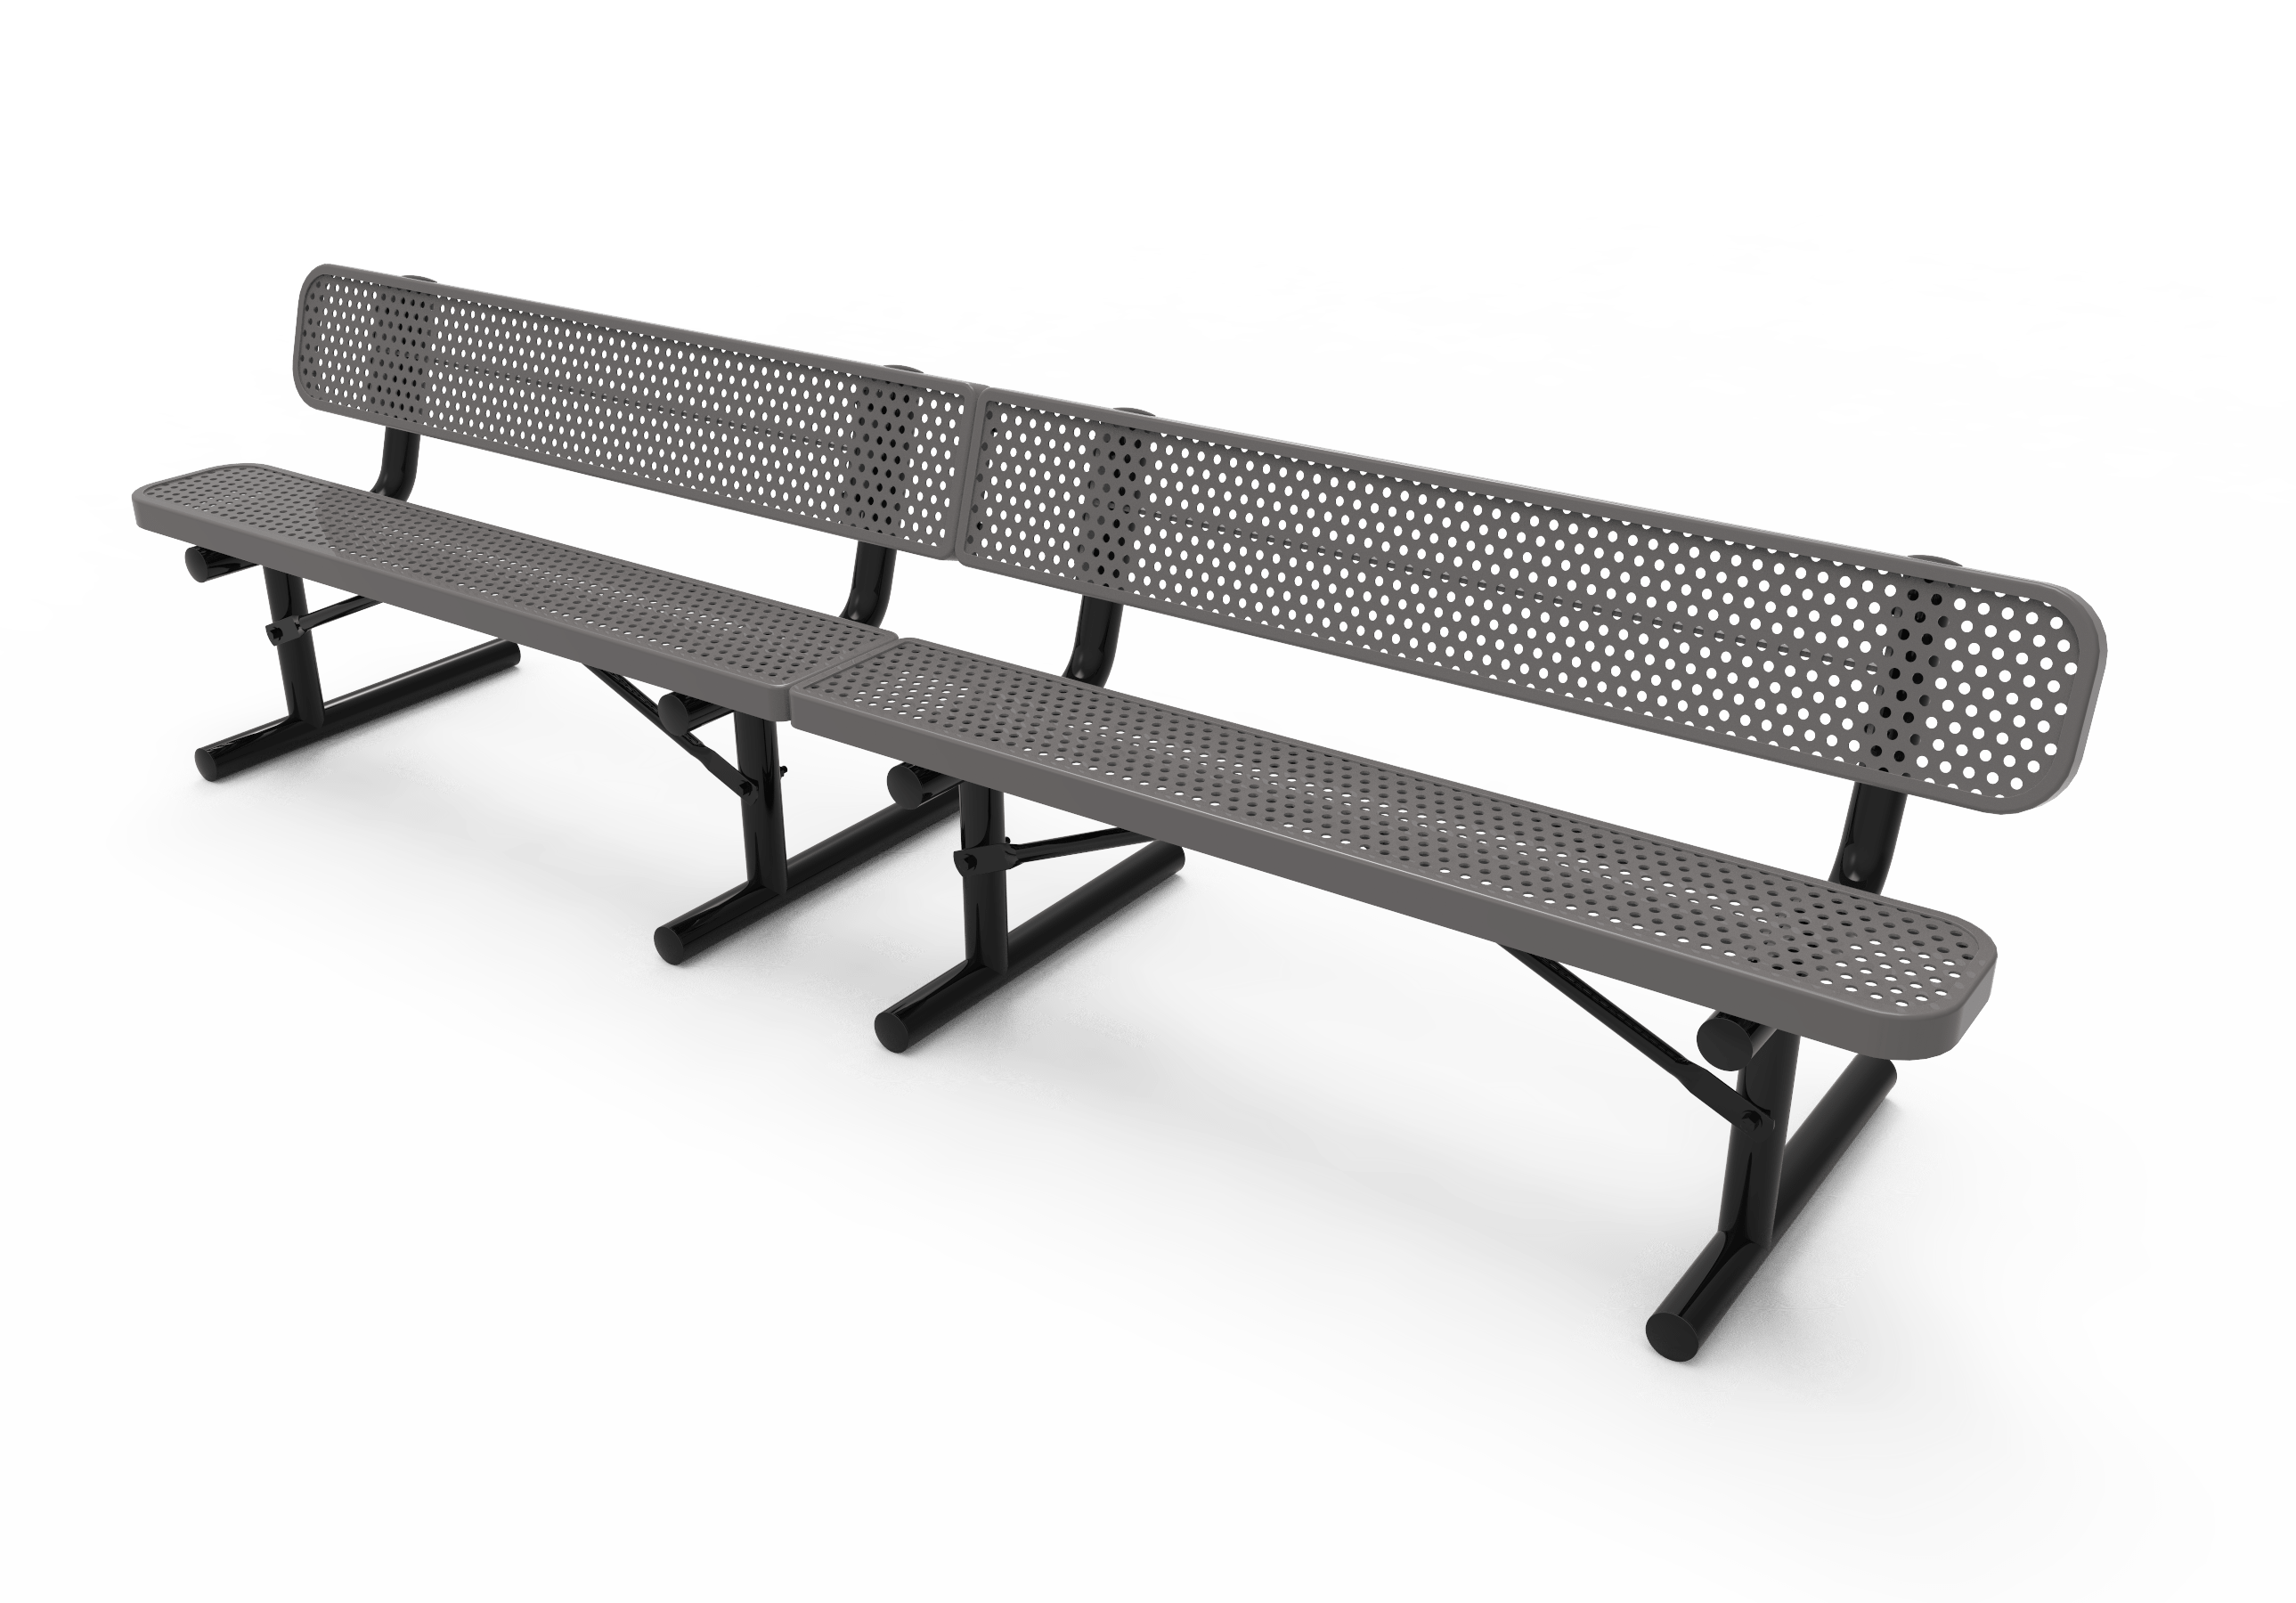 10′ Standard Bench With Back-Punched
BRT10-D-18-000
Industry Standard Finish
$959.00
BR108-B-18-000
Advantage Premium Finish
$1189.00
